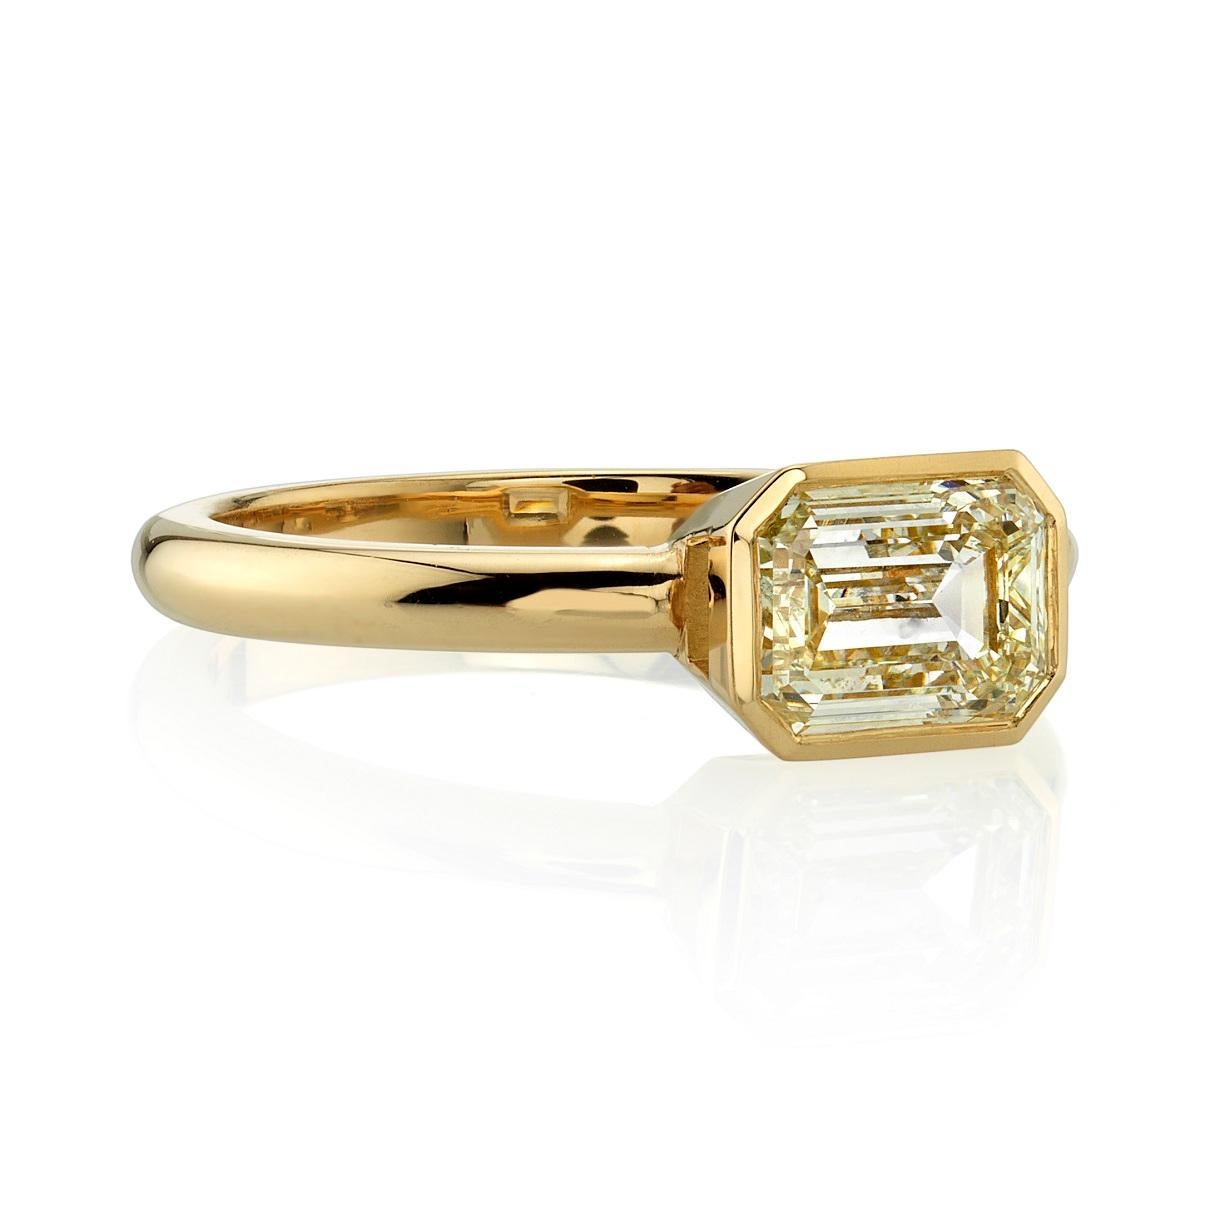 1.27ct N/VS1 GIA certified emerald cut diamond set in a handcrafted 18k yellow gold mounting. 

